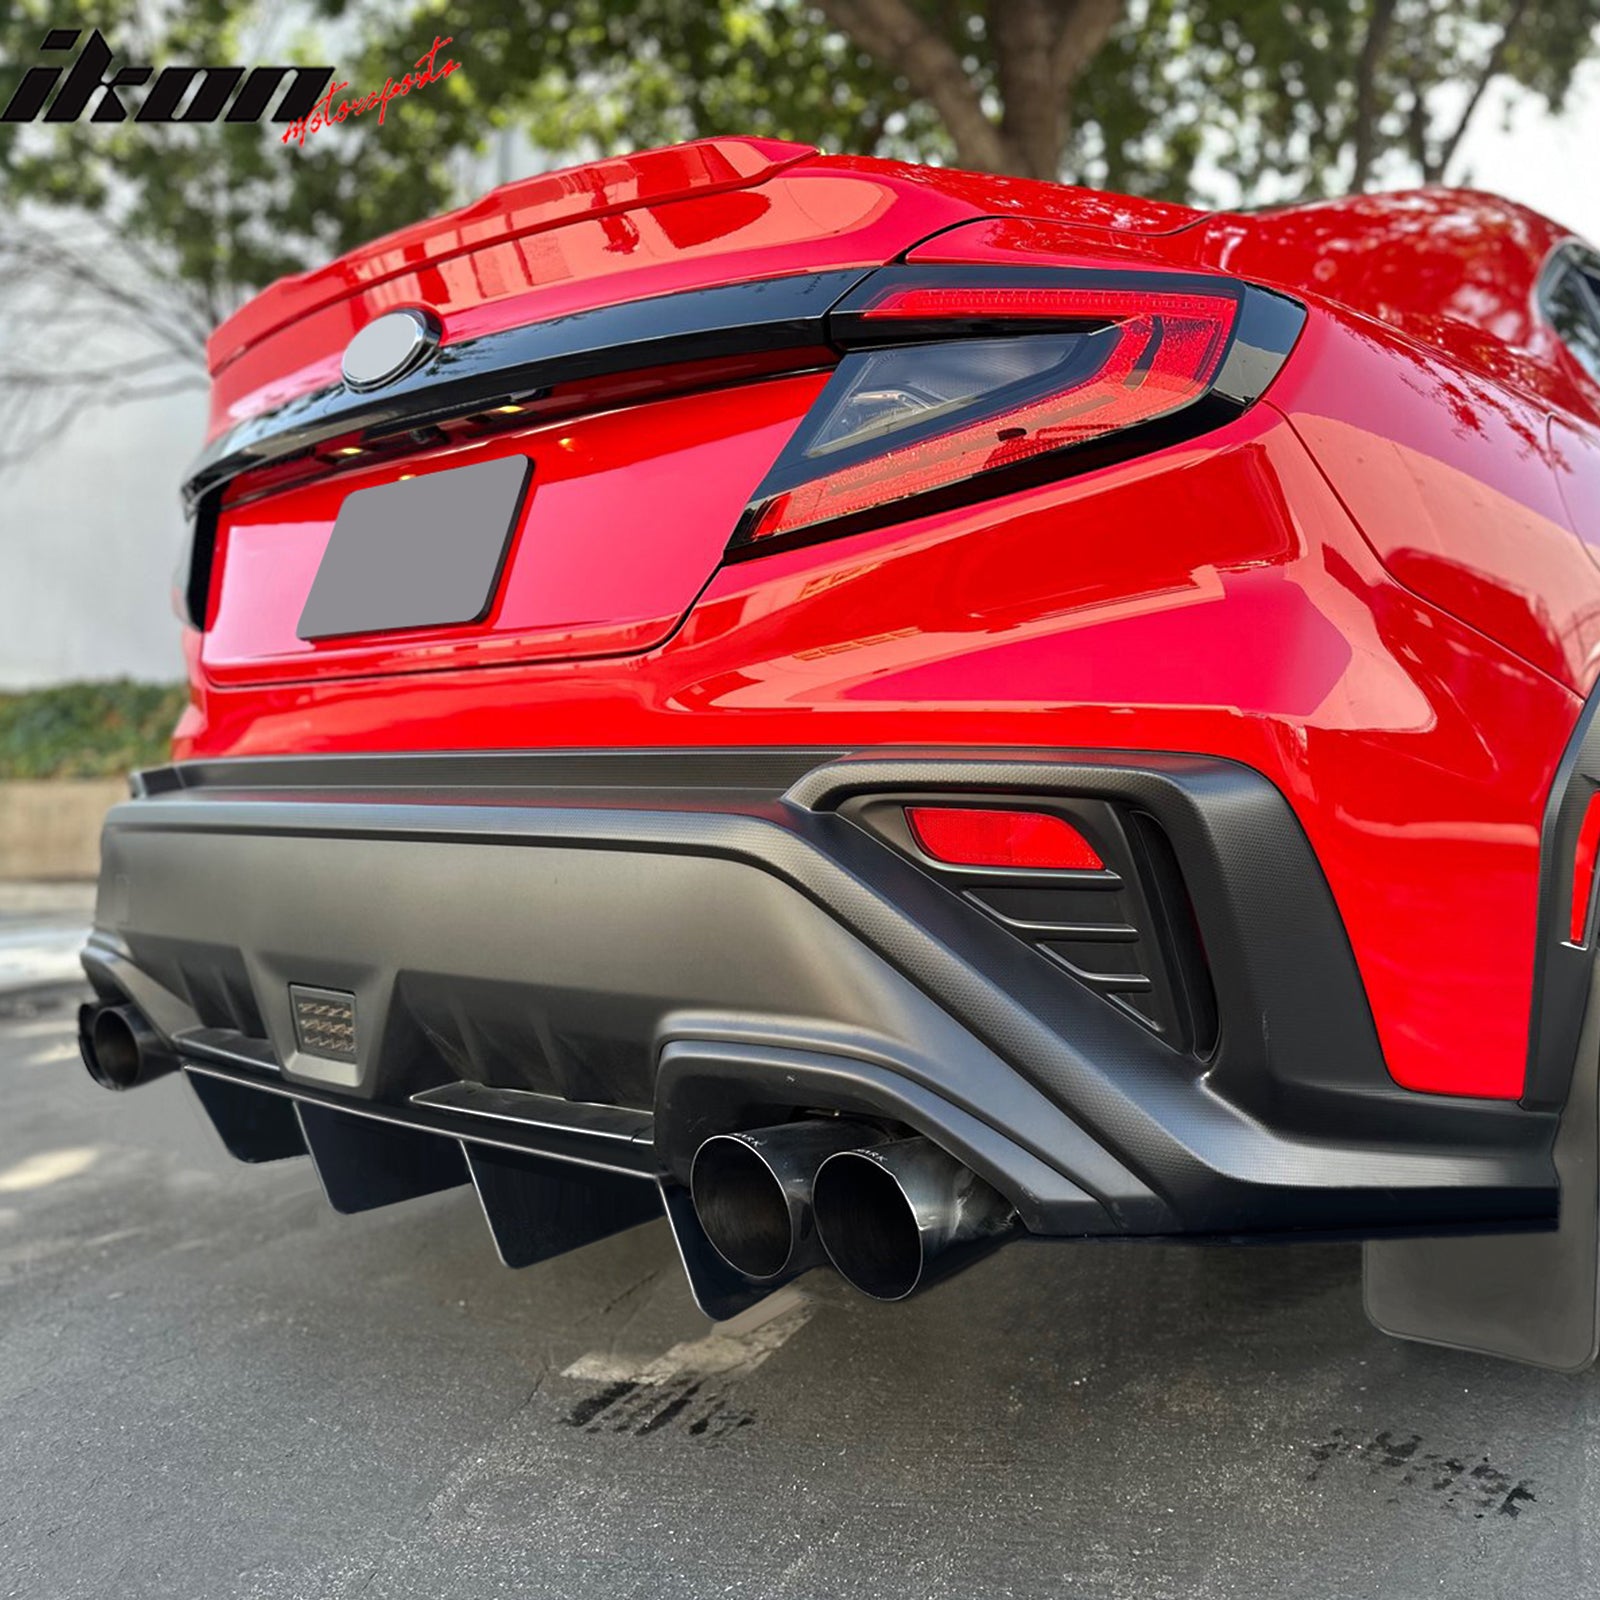 IKON MOTORSPORTS Rear Diffuser, Compatible With Universal Vehicles 22" x 20" in, Unpainted ABS Plastic Rear Under Chin Spoiler Air Dam Chin Valance Spoiler, for Sedan Coupe Hatchback Wagon